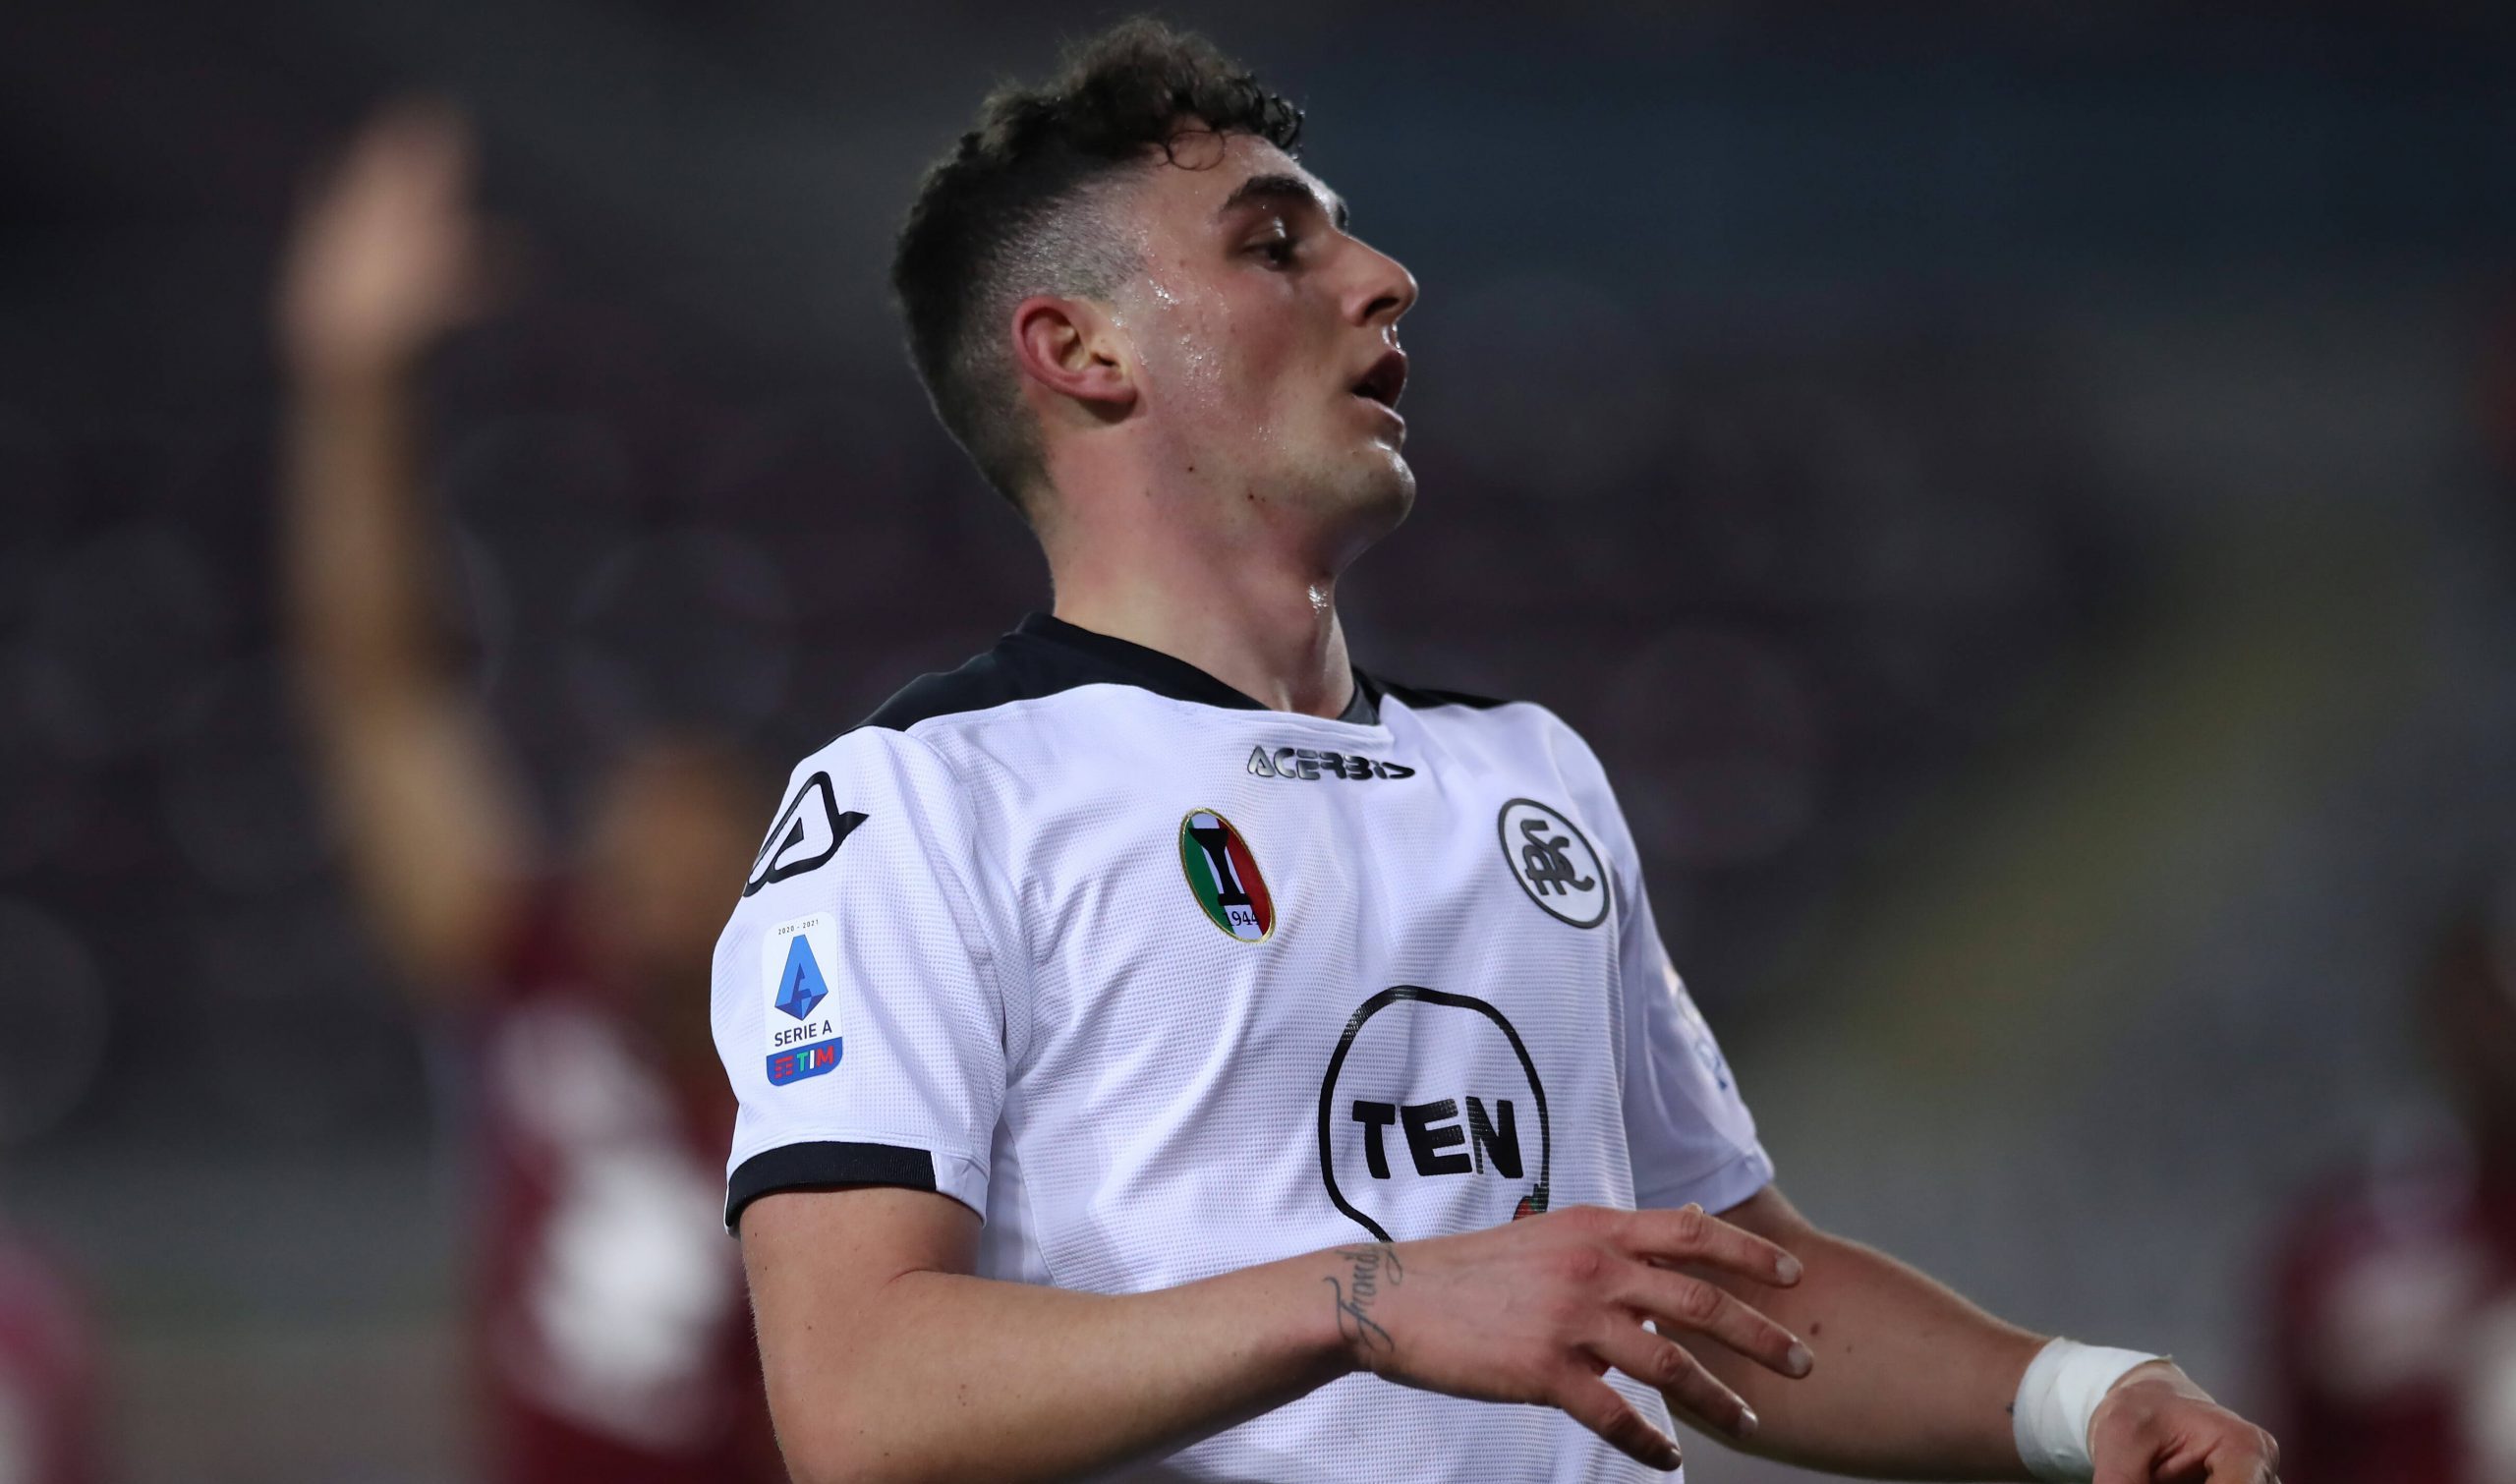 Although he is yet to cement his place in the starting XI, Roberto Piccoli has the potential to establish himself as one of Serie A’s most potent strikers